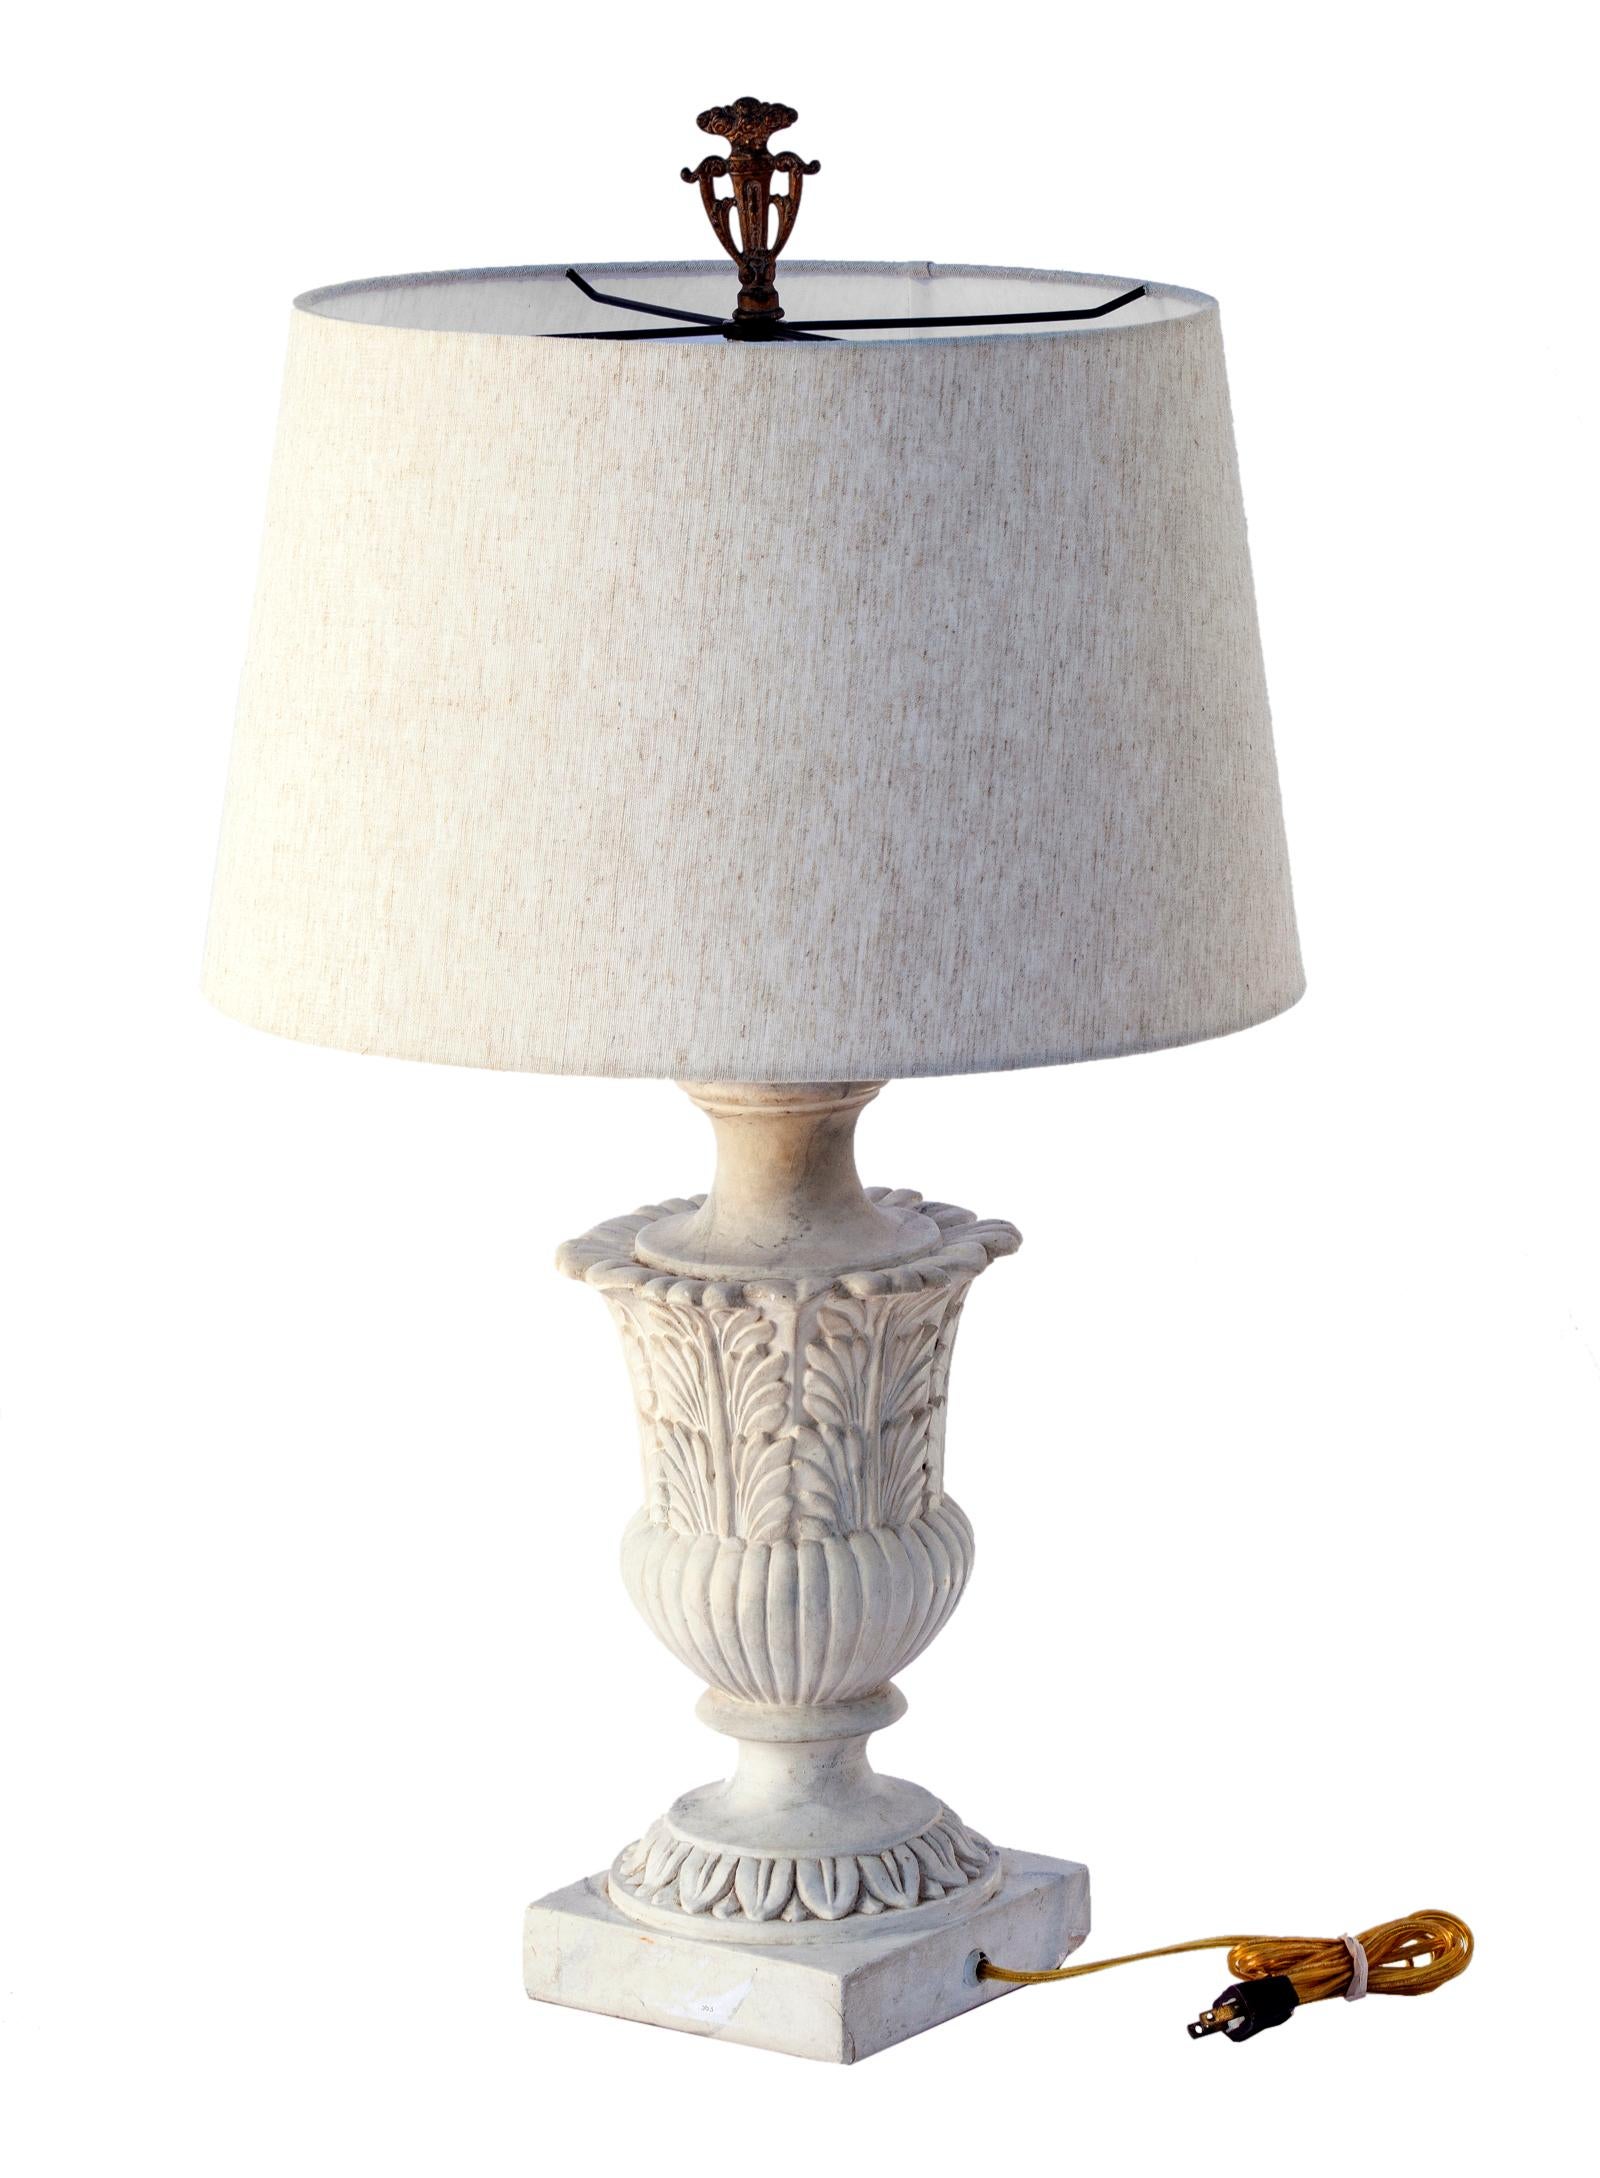 Neoclassical Revival Faux White Marble Lamp White Linen Shade For Sale